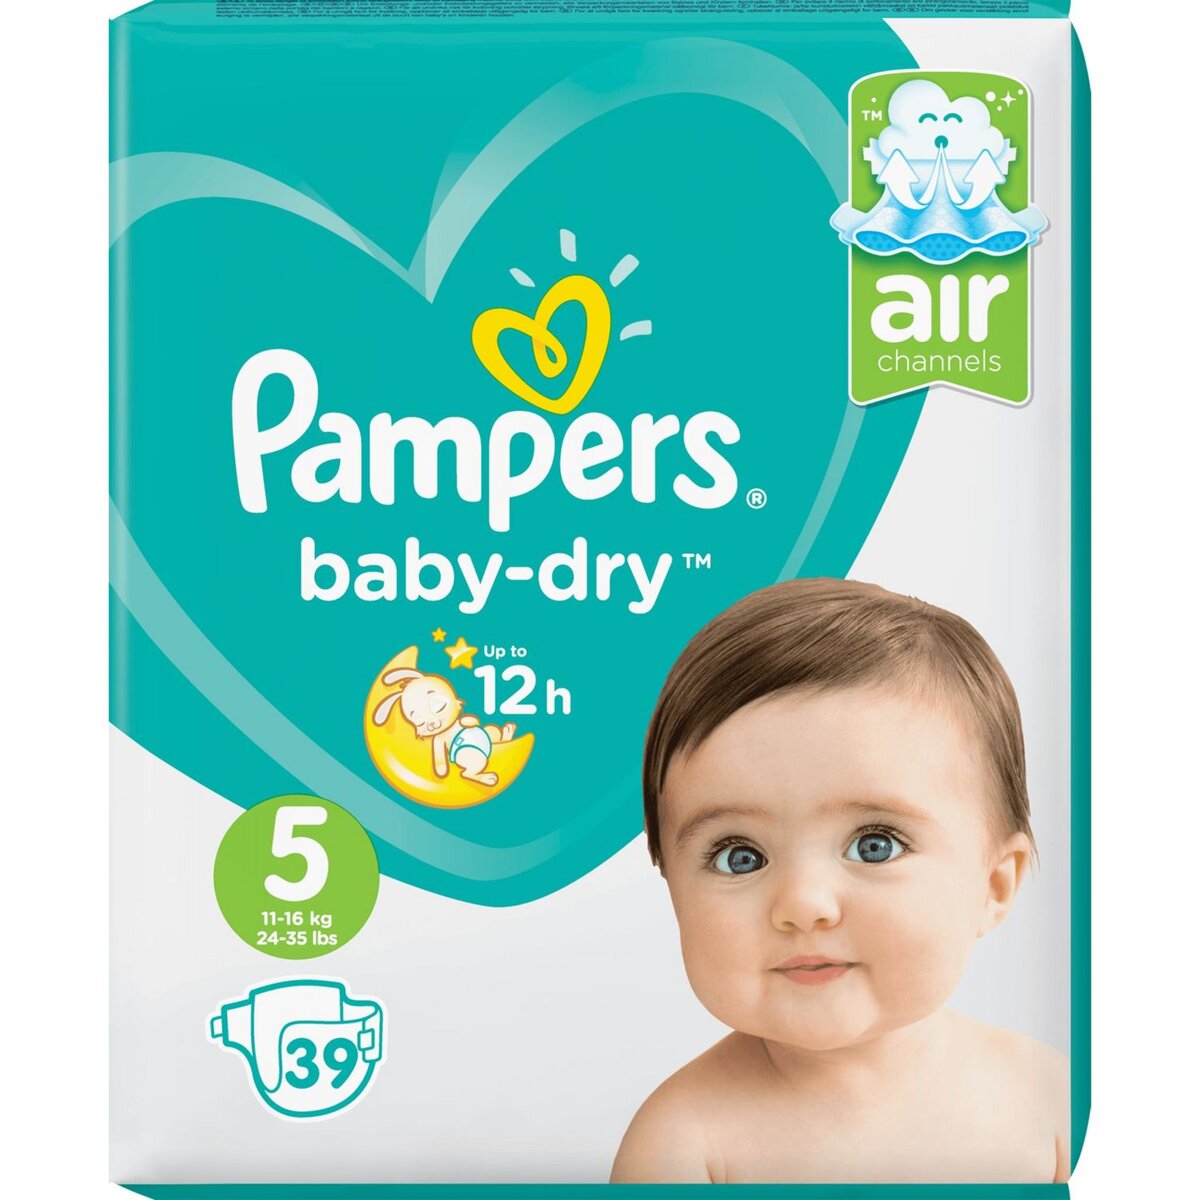 PAMPERS Baby-dry géant couches taille 5 (11-16kg) 39 couches